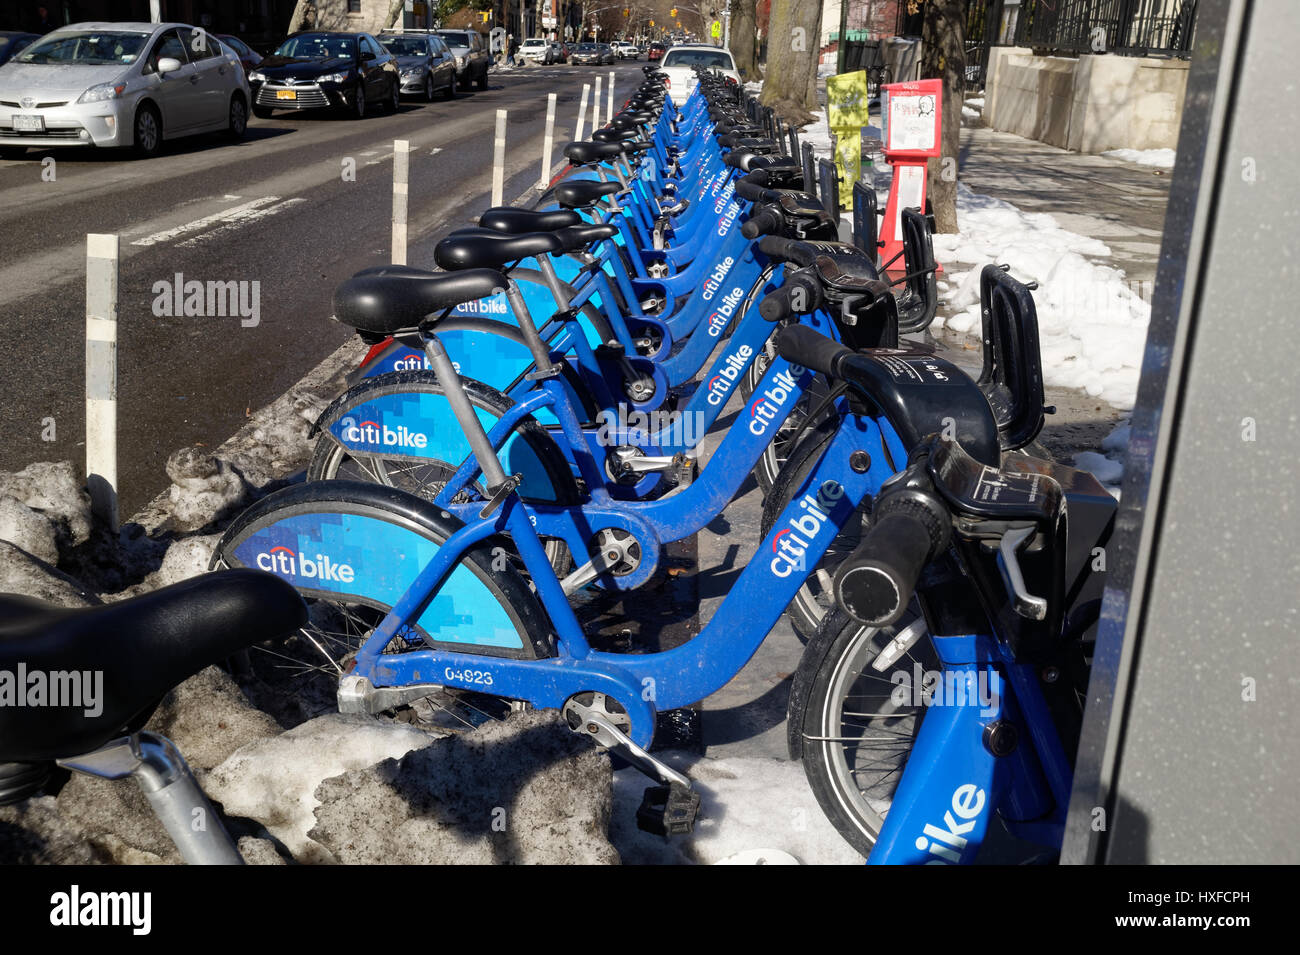 Citi bank bikes docked in New York City. Citi bike is a bike sharing system available throughout the five boroughs. Stock Photo